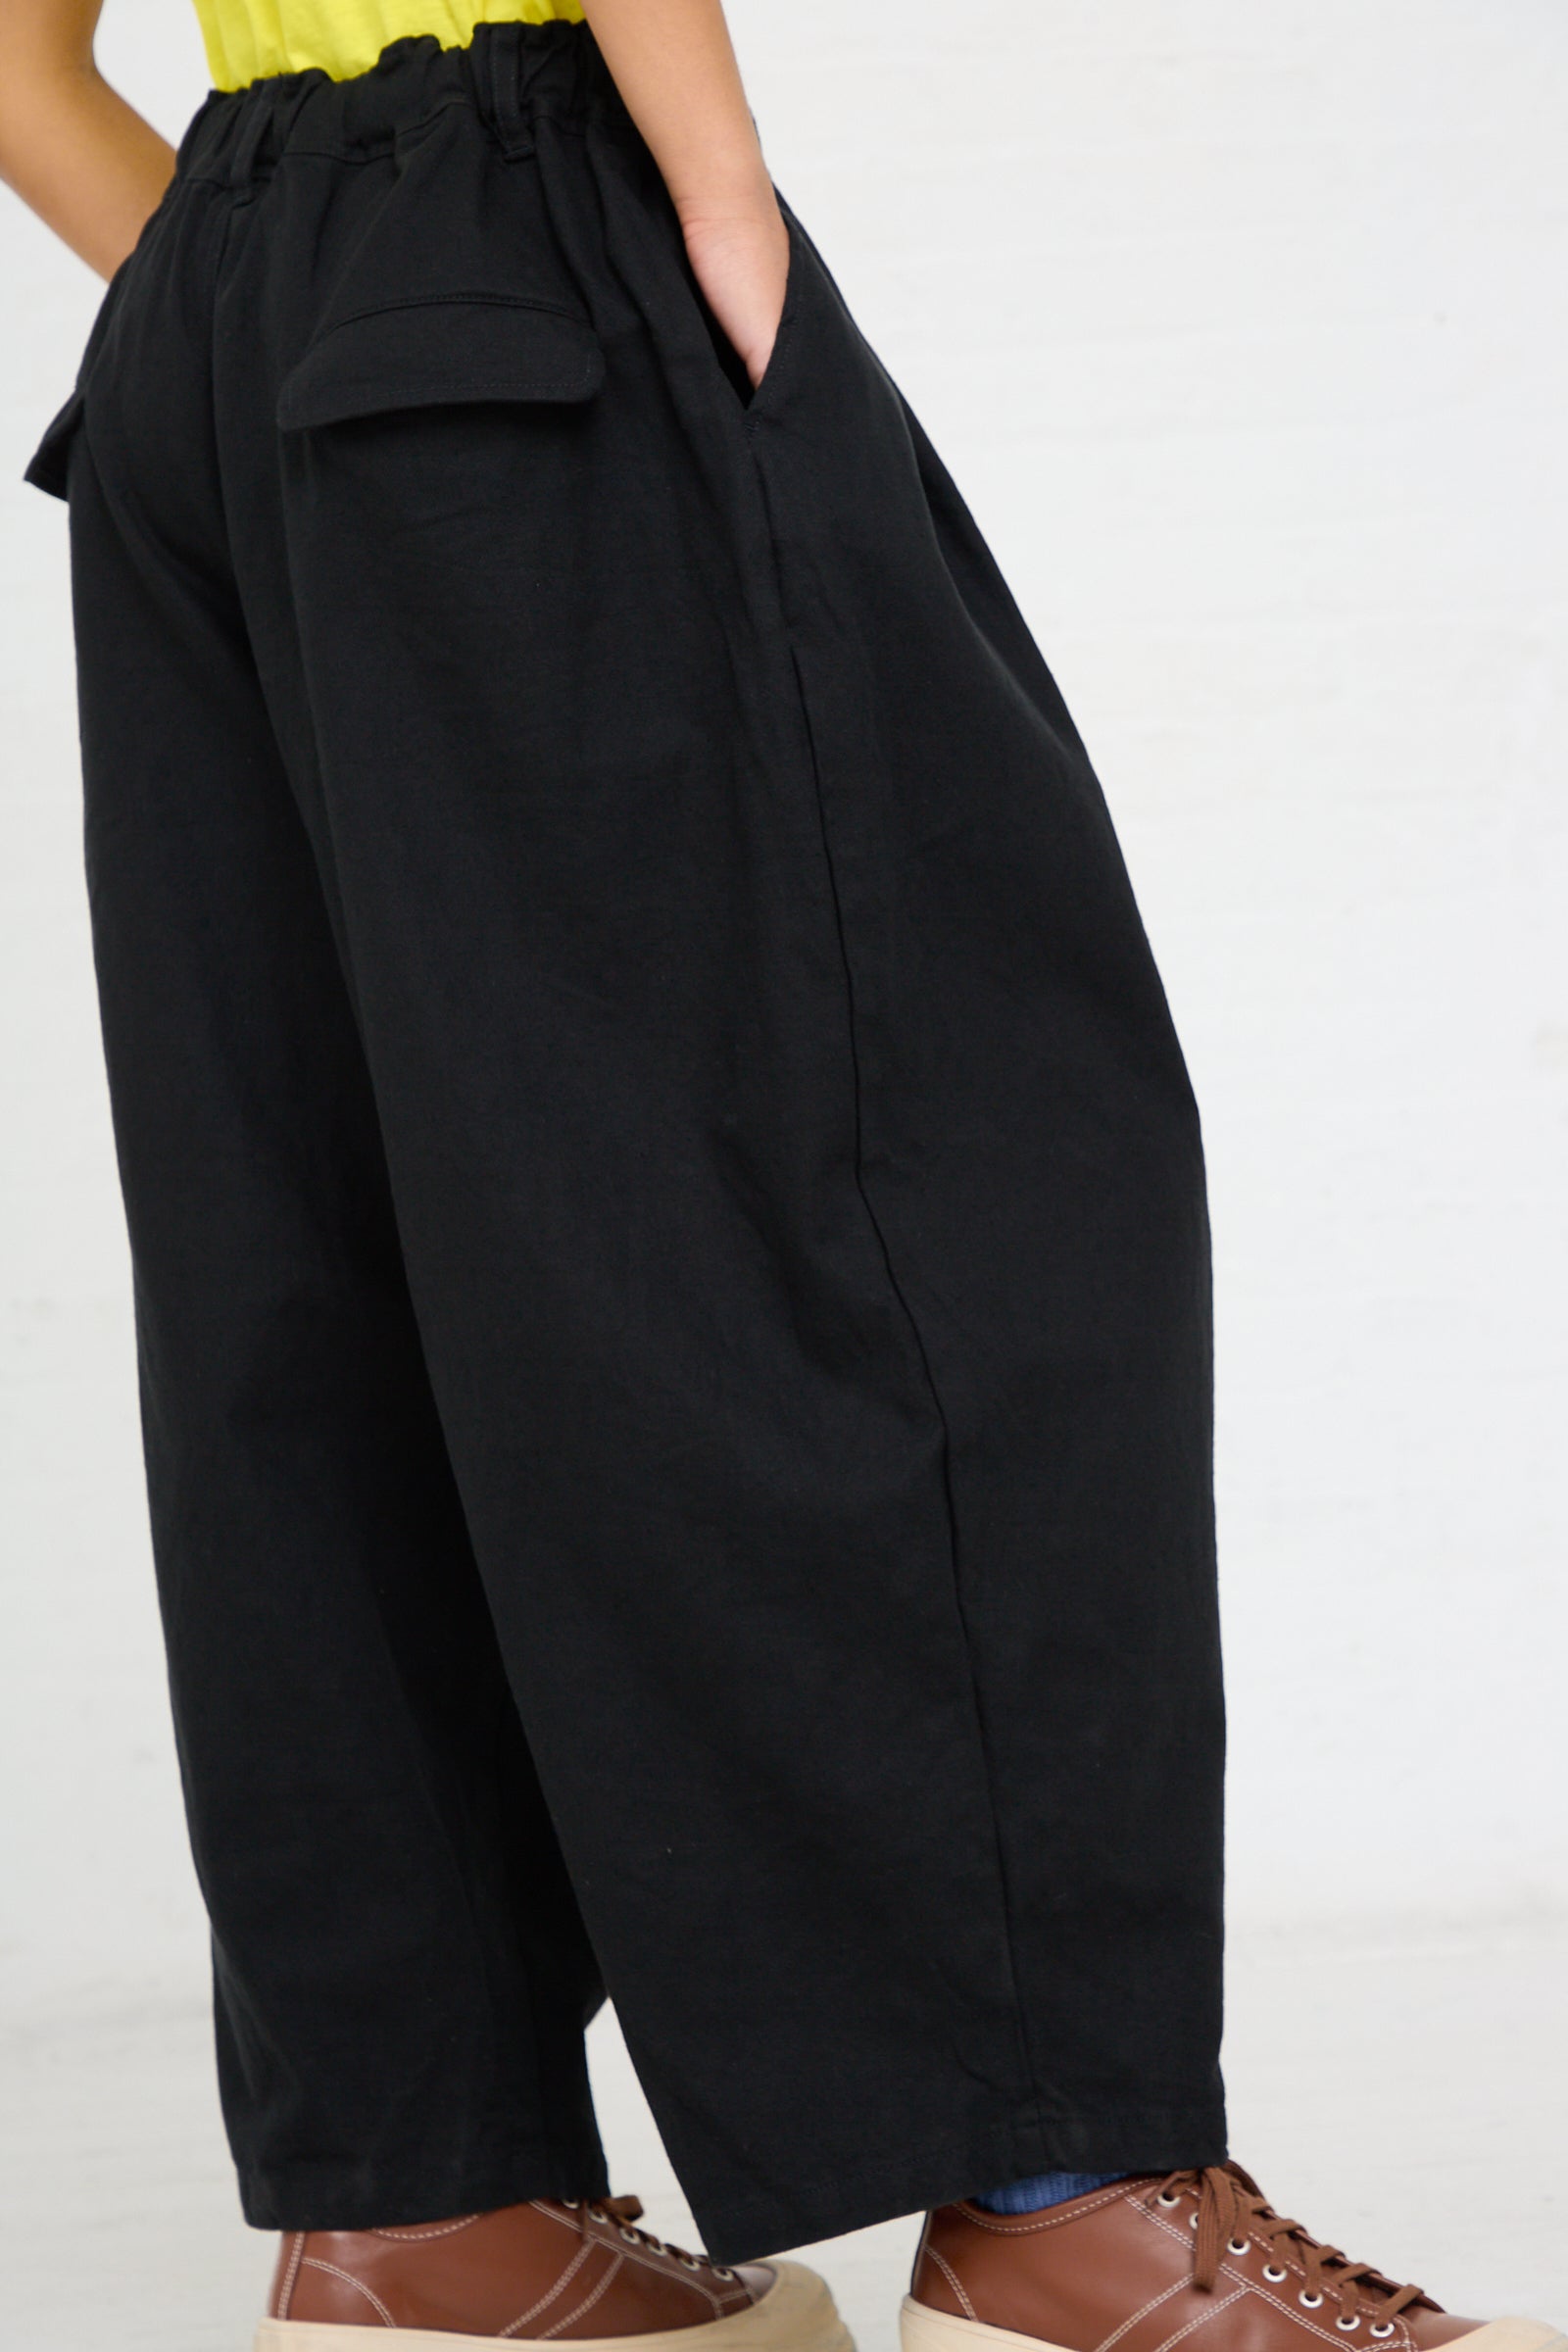 A person wearing the Woven Cotton Linen Pant in Black by Ichi Antiquités and brown lace-up shoes.